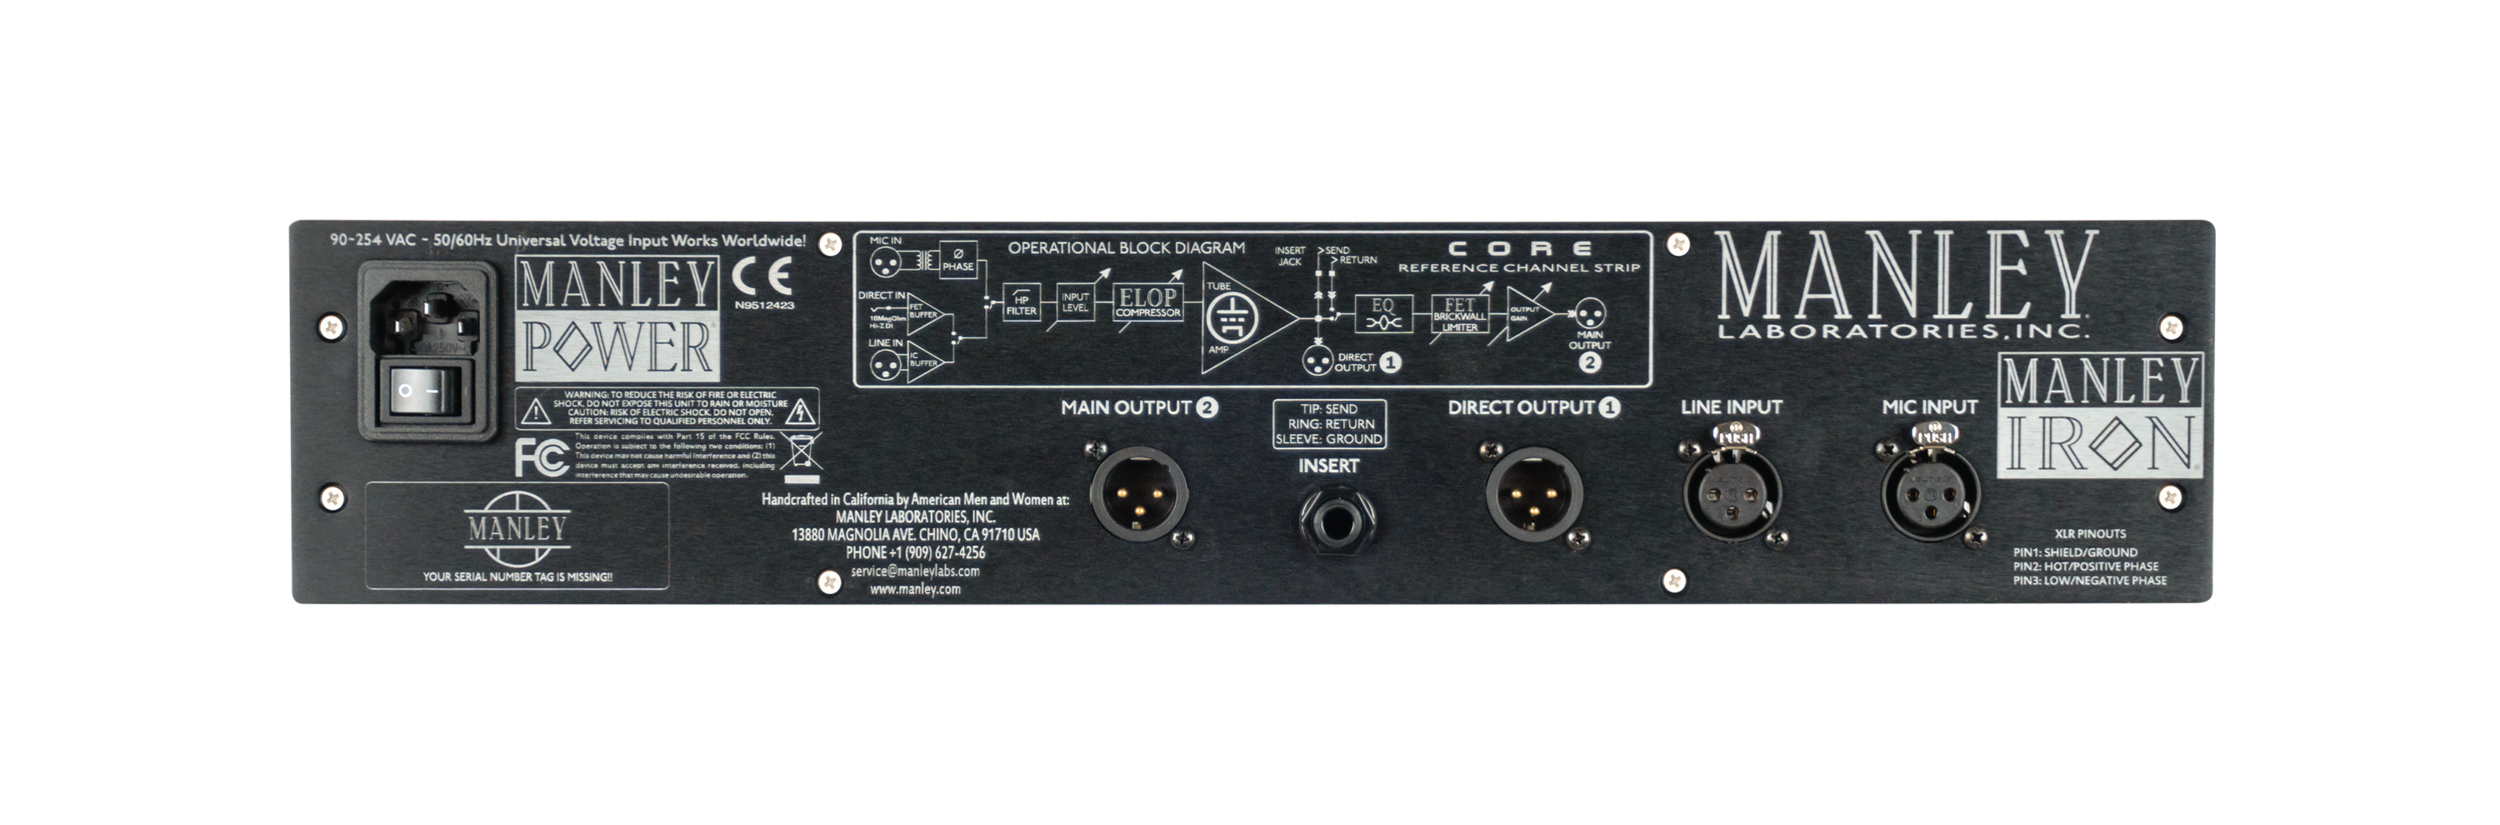 Baxandall EQ Manley Labs Core Channel Tube Channel Strip with ELOP FET Limiter Tube Mic Preamp 